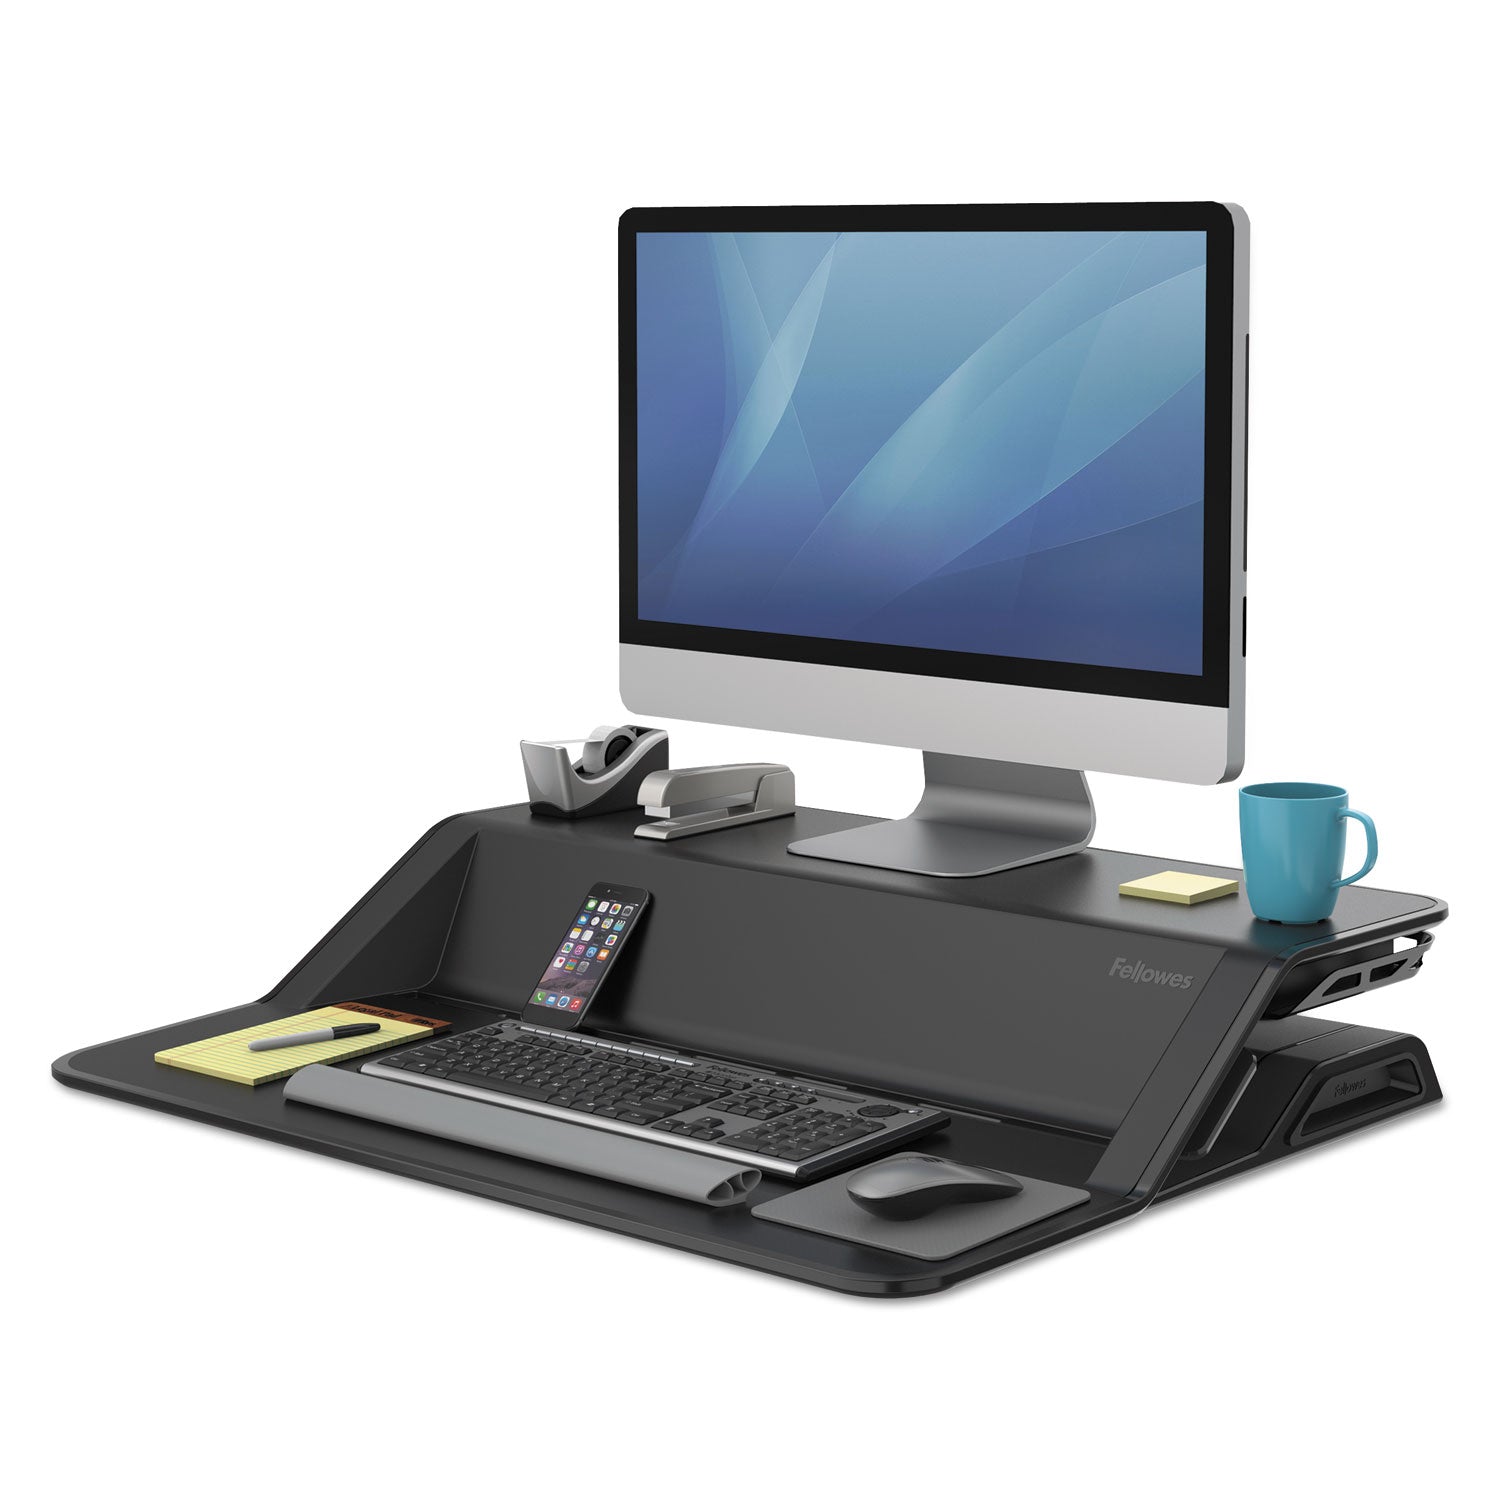 Lotus Sit-Stands Workstation, 32.75" x 24.25" x 5.5" to 22.5", Black - 3